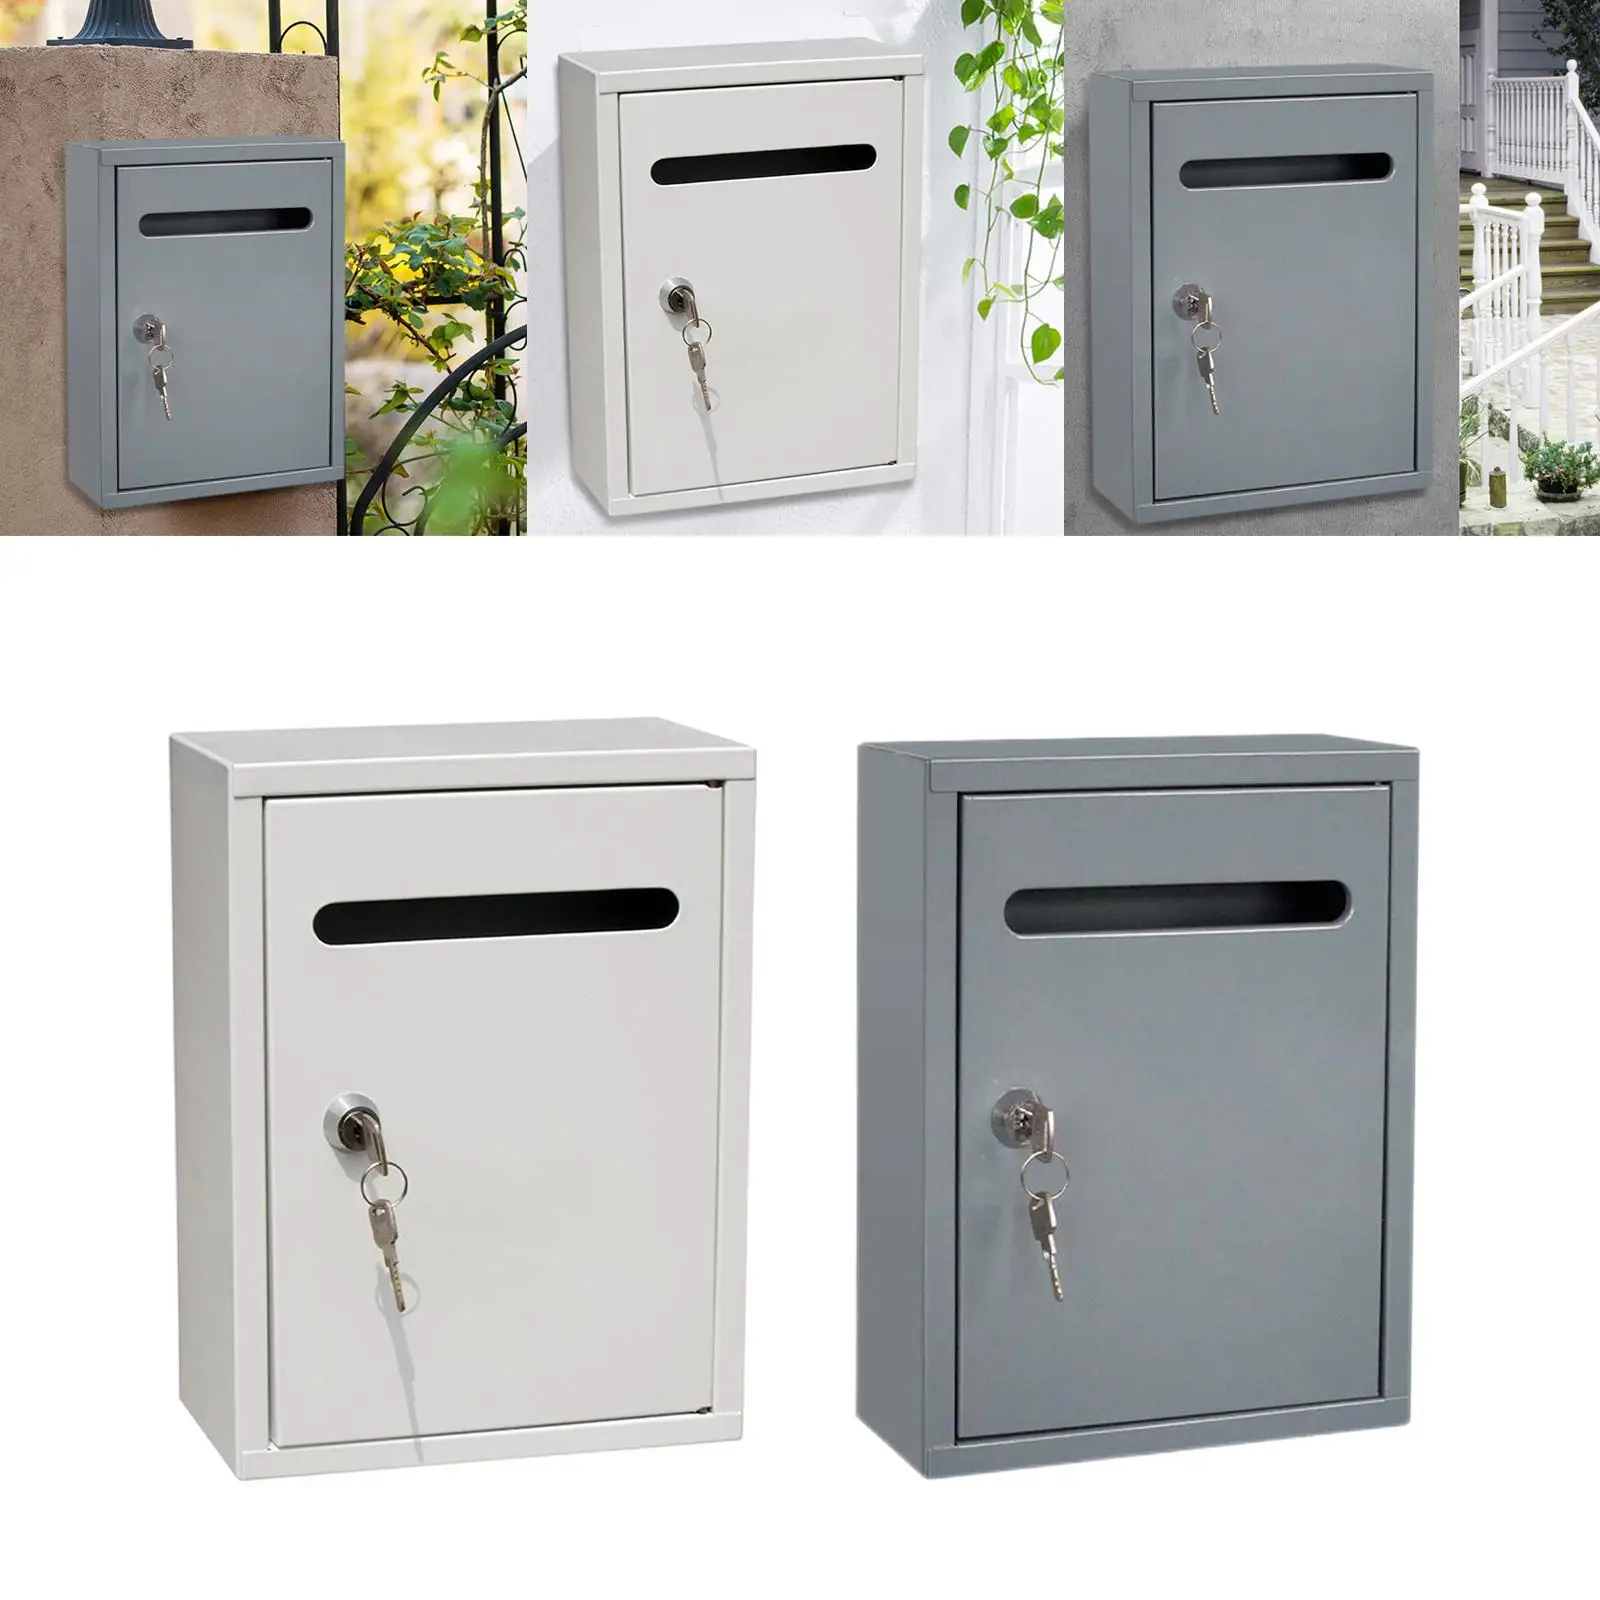 Mailbox Key Lock Wall Mounted Drop Box Heavy Duty Collection Boxes Letterbox